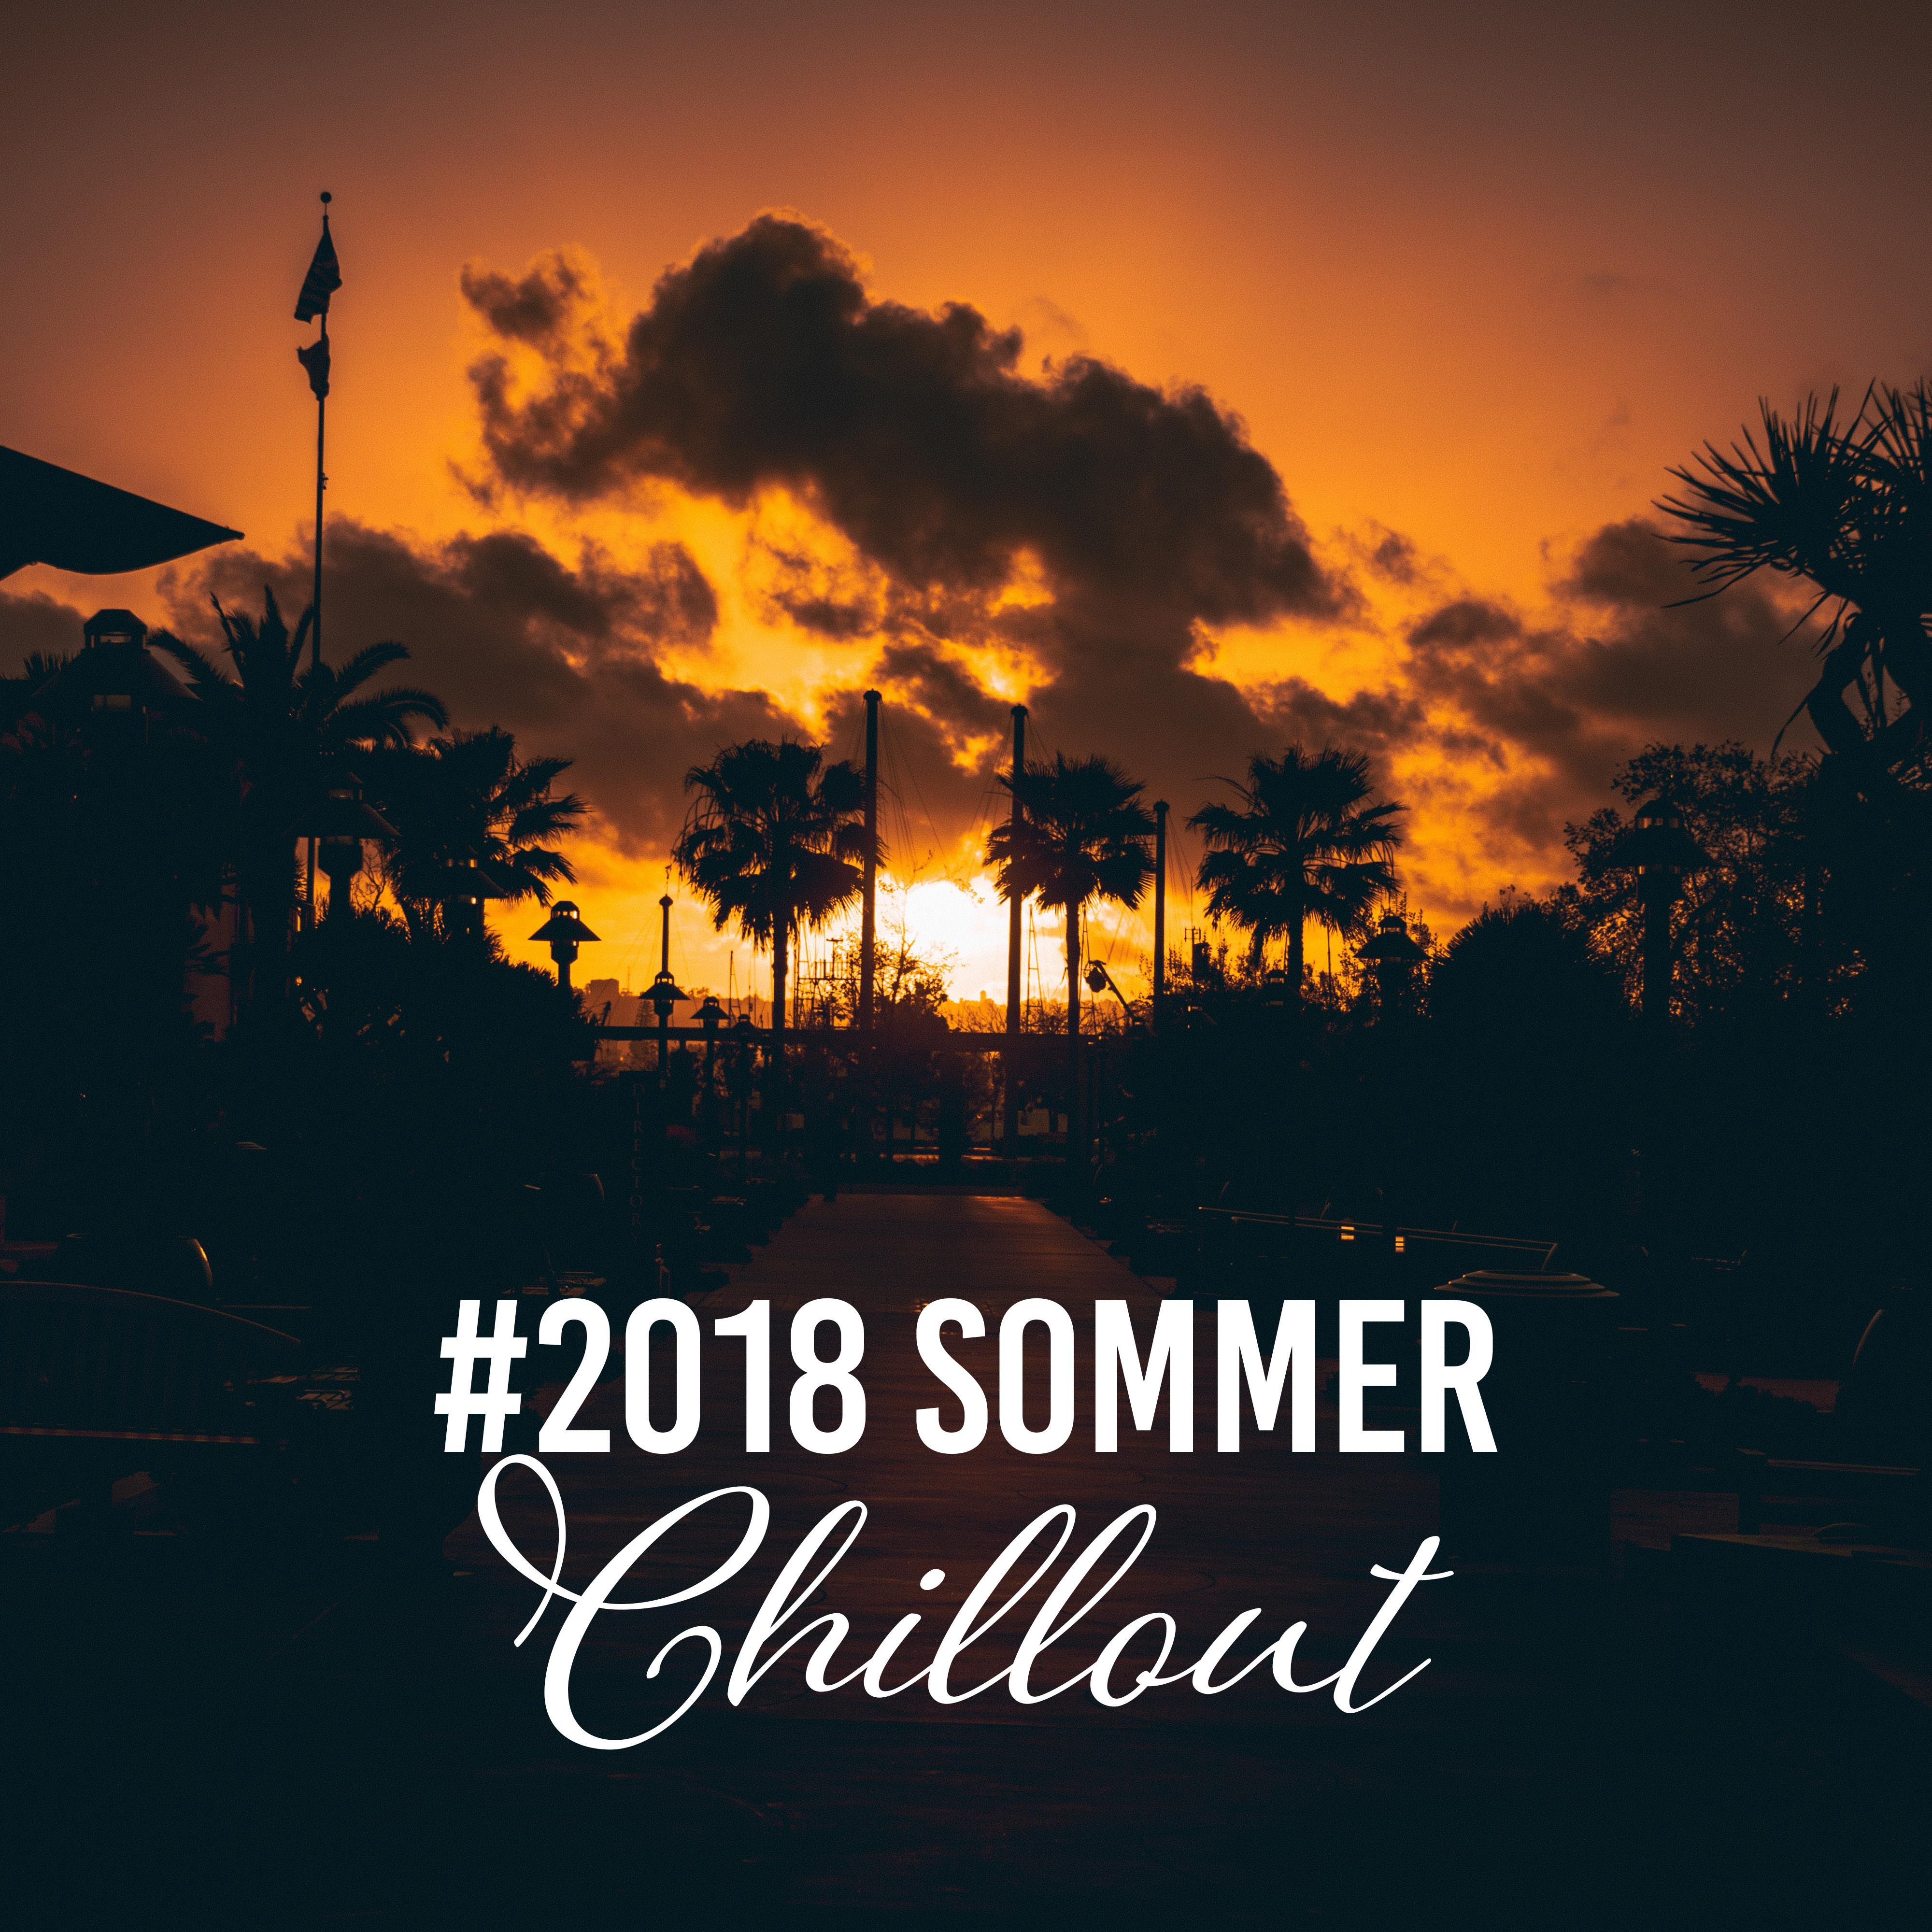 #2018 Sommer Chillout